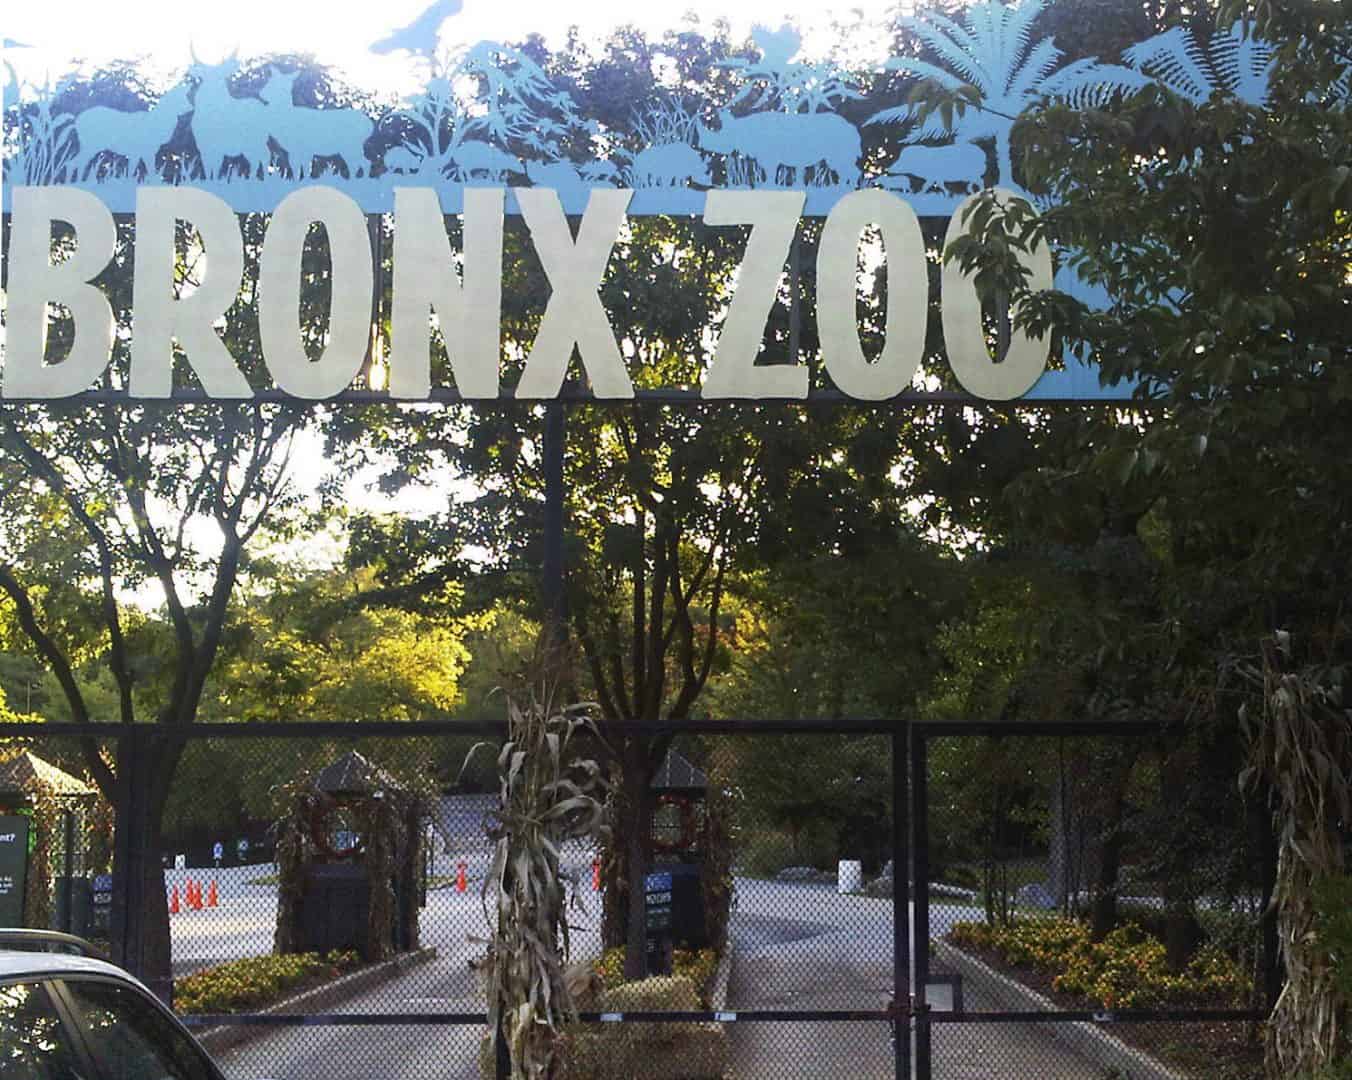 Tiger at zoo in New York tests positive for coronavirus